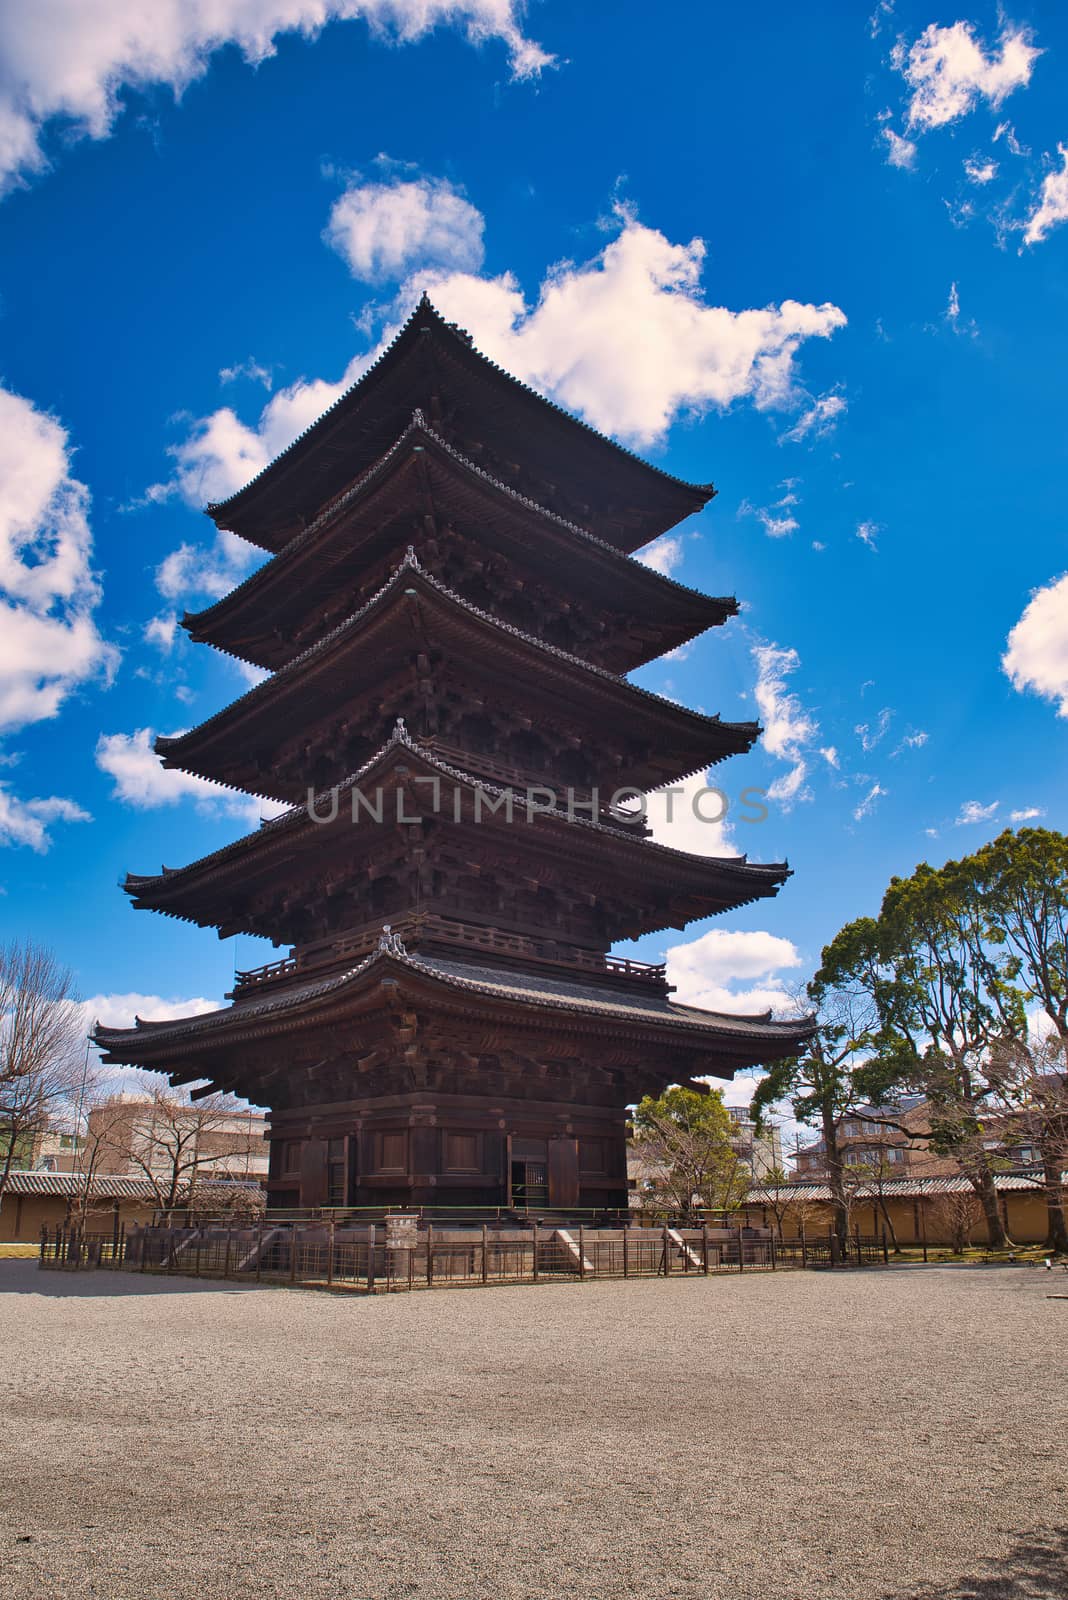 The pagoda of kyoto is one of the oldest temple in Japan